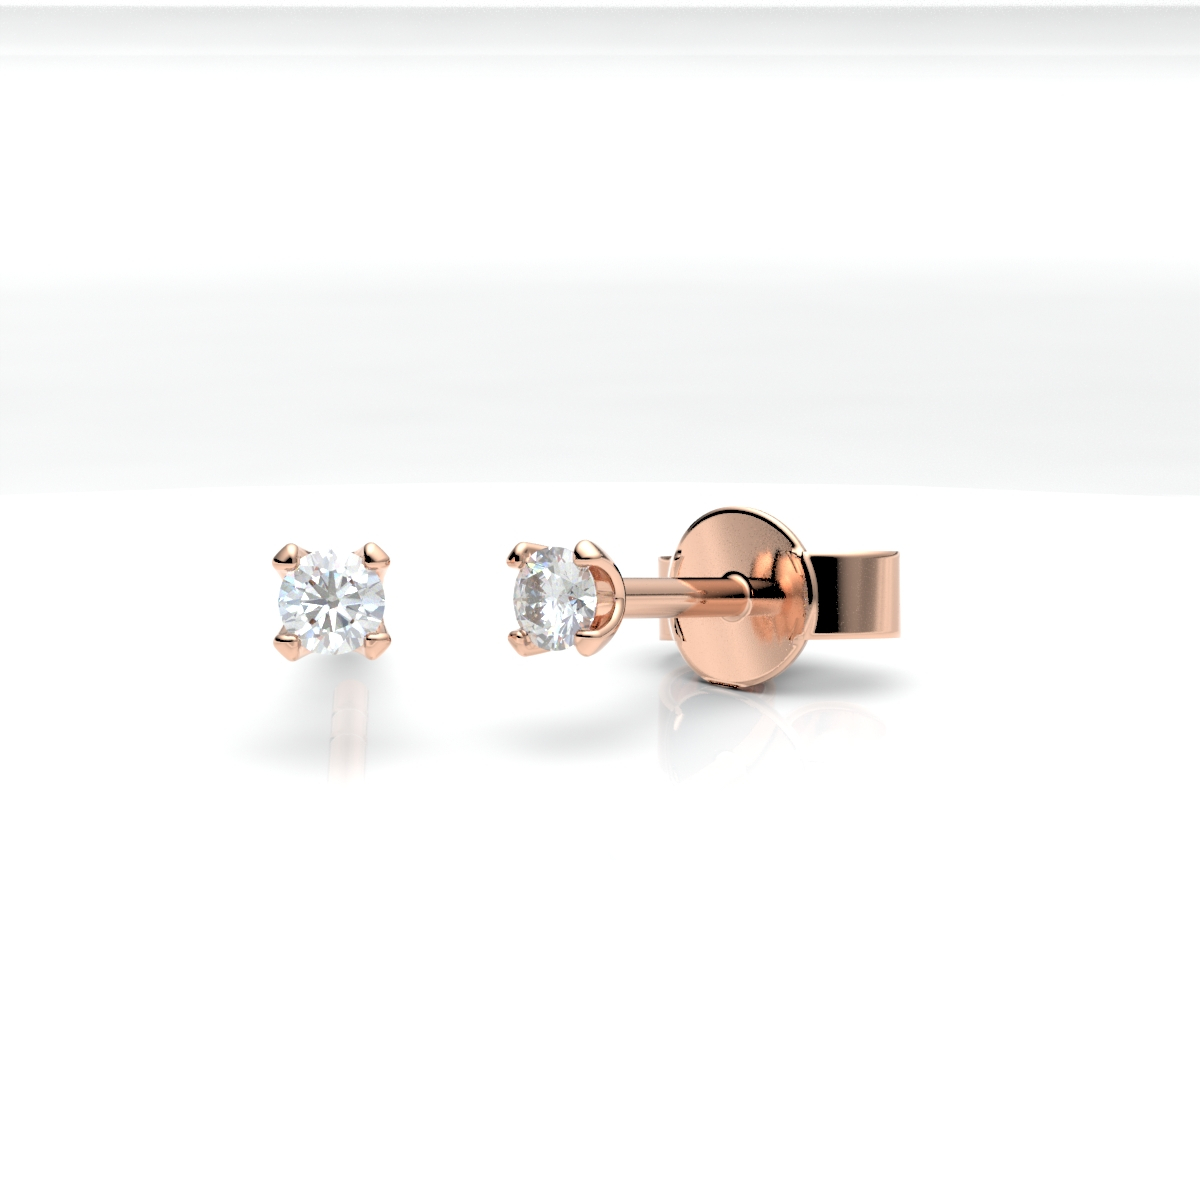 012502-5H24-001 | Ohrstecker Oberhausen 012502 585 Roségold<br> Brillant 0,100 ct H-SI ∅ 2.4mm<br>100% Made in Germany  